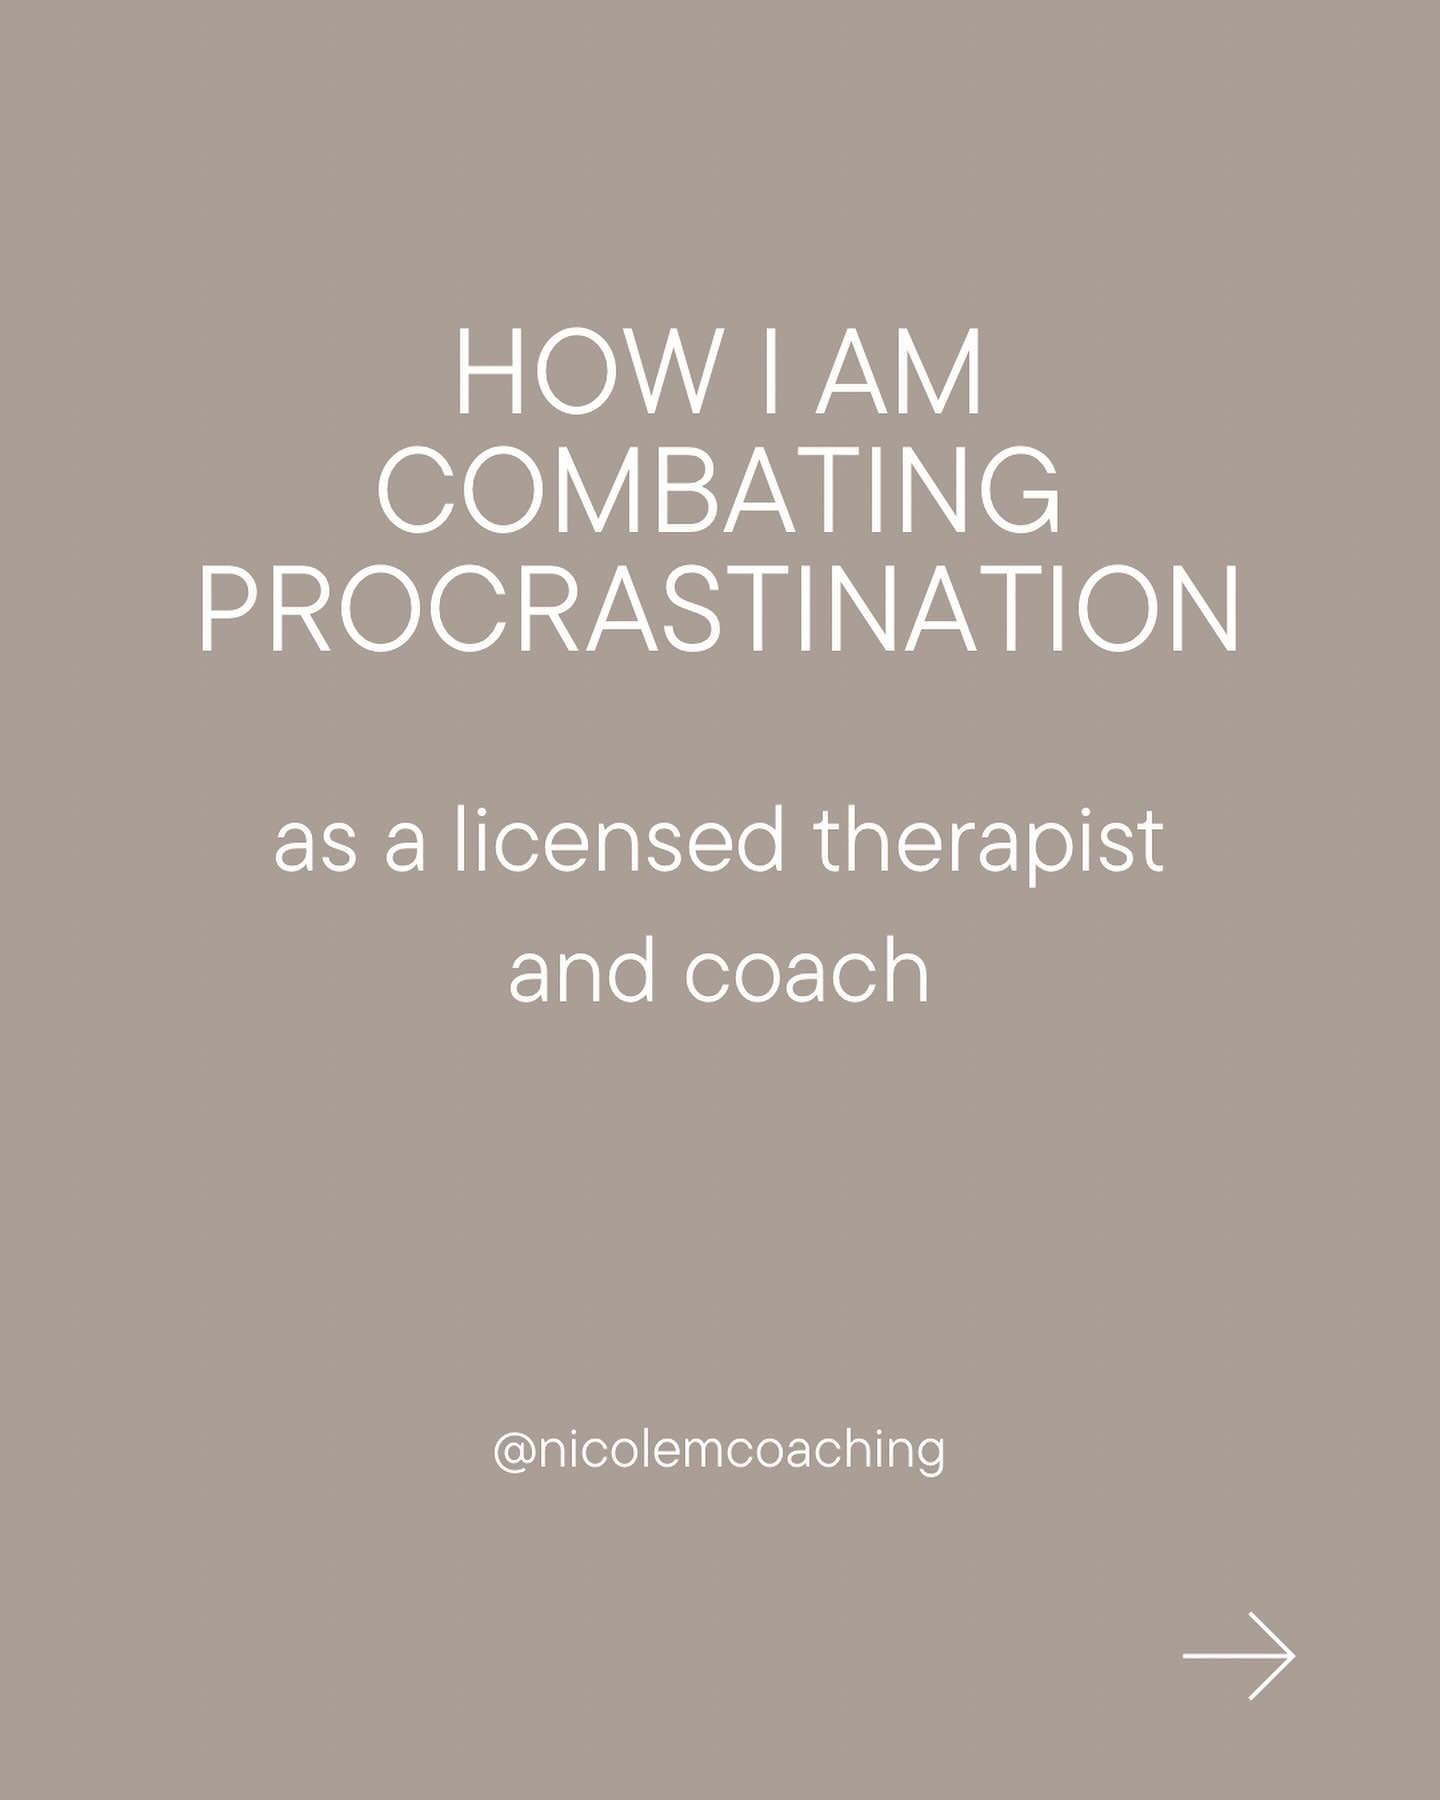 What do you do when you hit a procrastination slump?

I used to beat myself up, feel like 💩for a few days, then force myself to tackle the task I was procrastinating on without a plan or the appropriate amount of time to execute. 

Then I learned a 